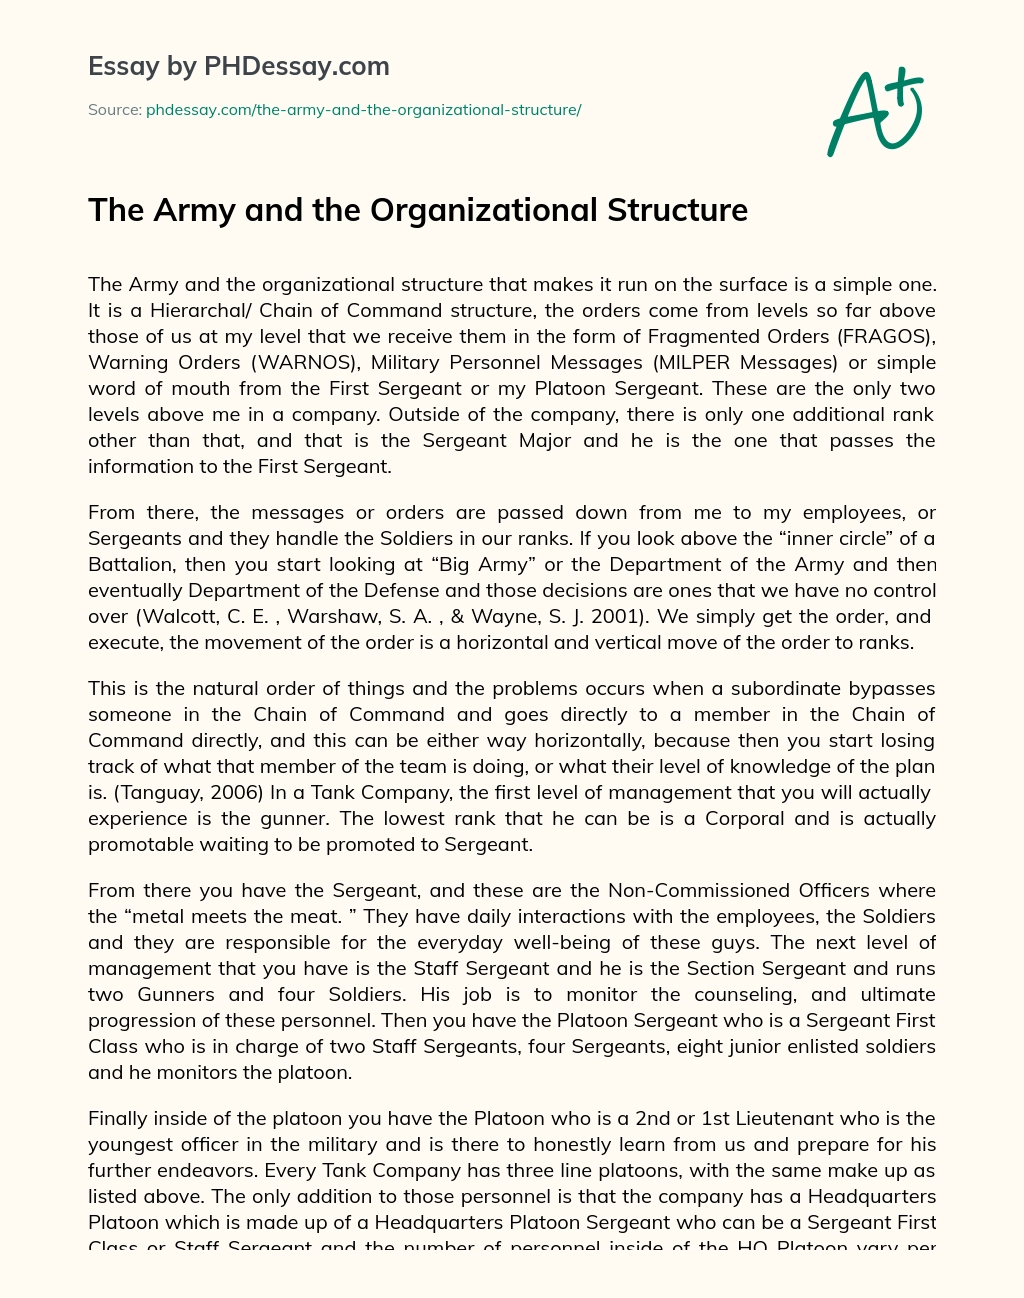 The Army and the Organizational Structure essay